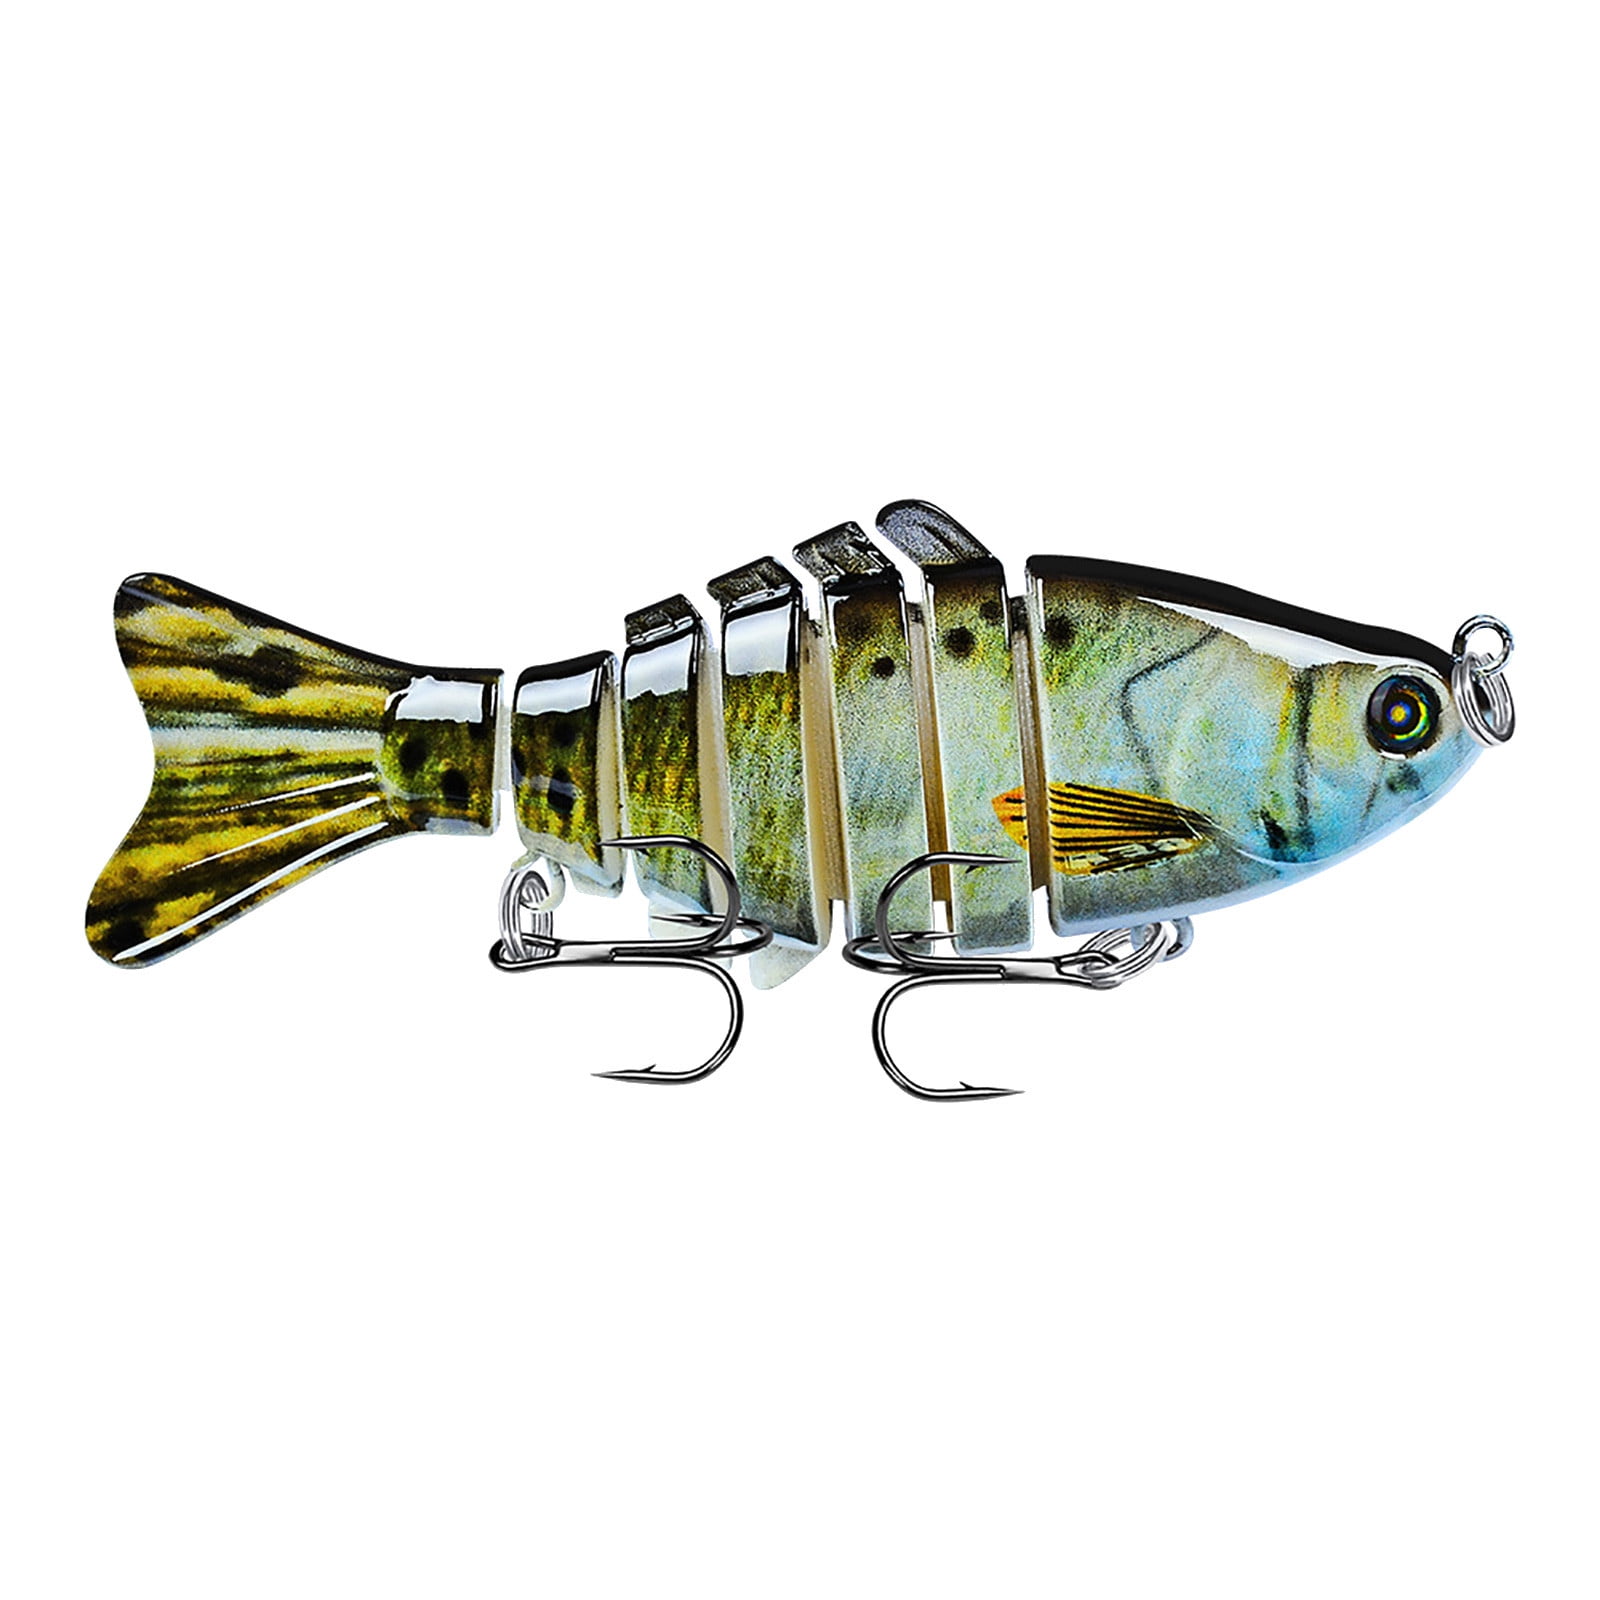 Fishing Lures for Bass Trout Multi Jointed Swimbait Slow Sinking Bionic  Swimming Lures Micro-Jointed Swimbait, 10cm Road Sub Bait Plastic Hard  Bait, 15.5g Multi Knot Fish Simulation Bait Pseudo Bait H 